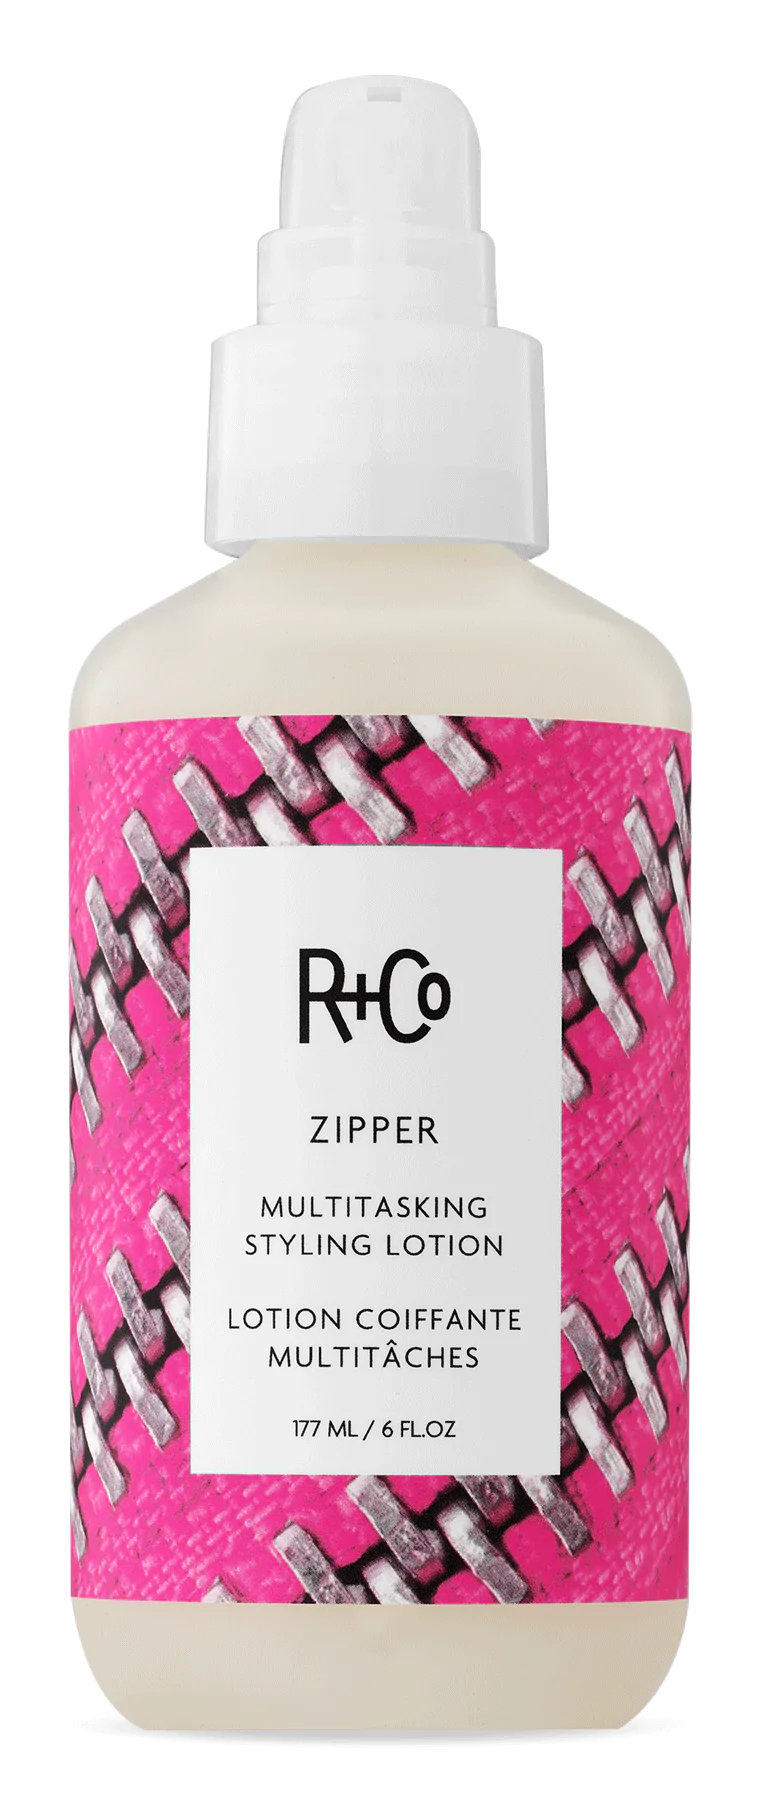 R+CO ZIPPER MULTITASKING STYLING LOTION - Totality Medispa and Skincare